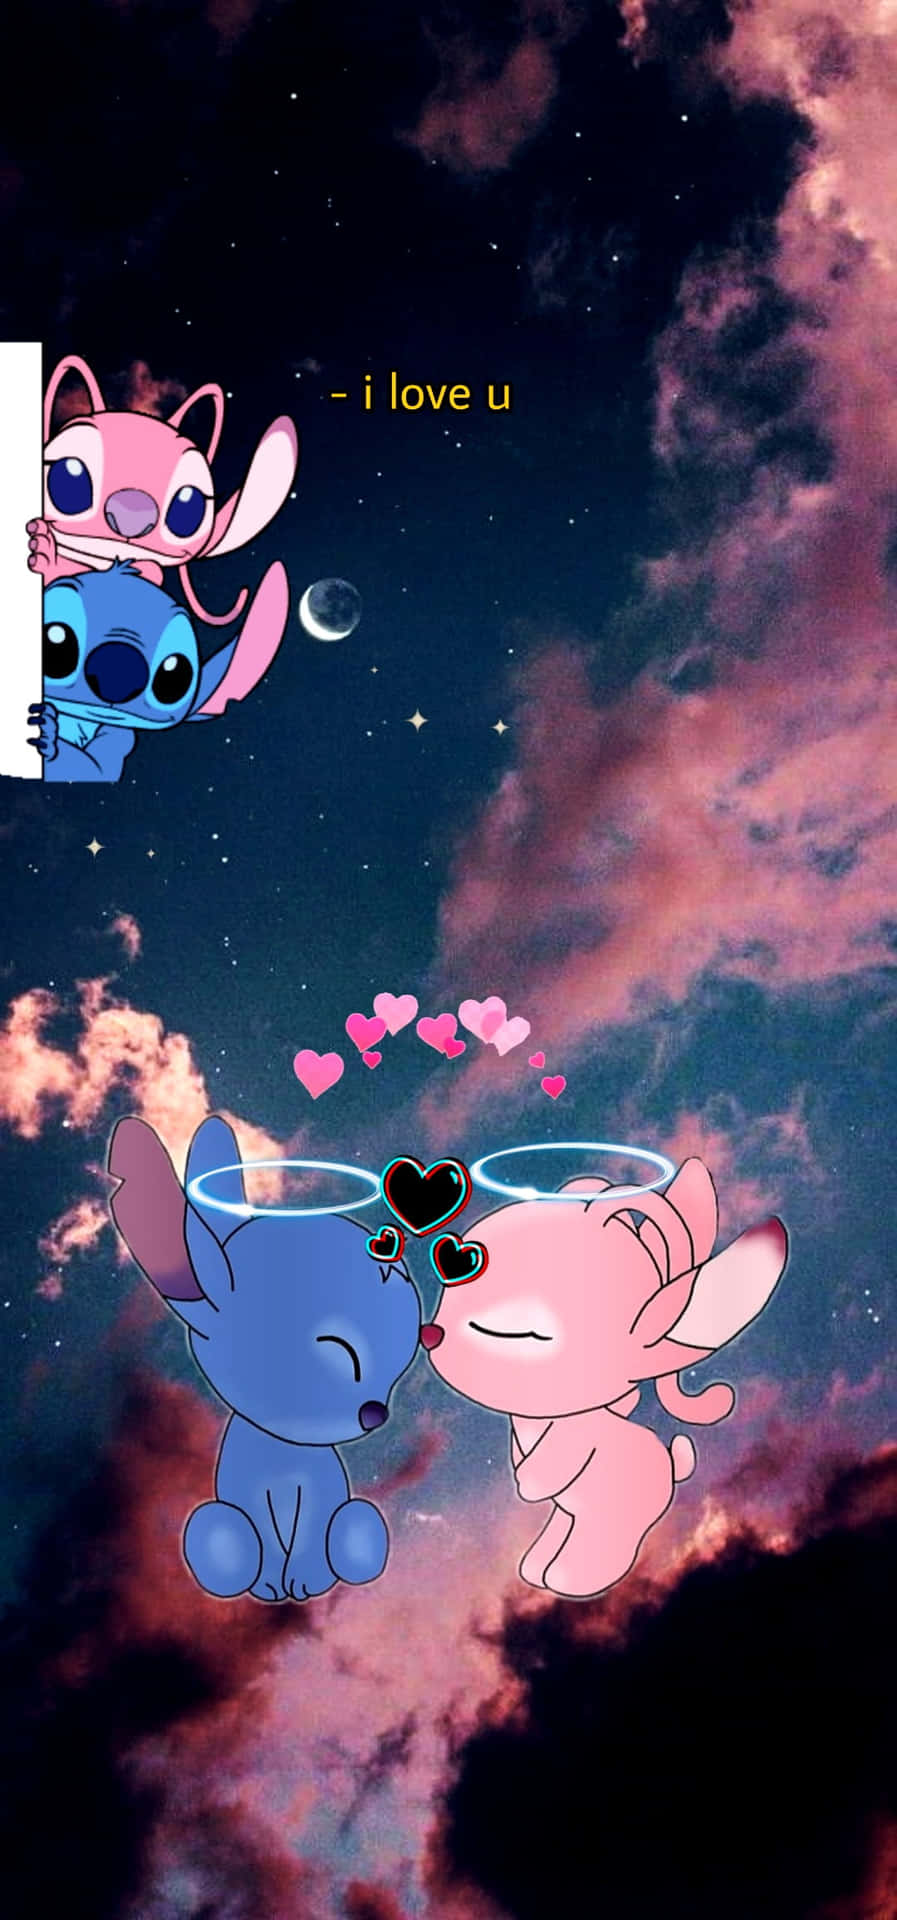 Love Stitch and Angel Embracing Each Other Wallpaper